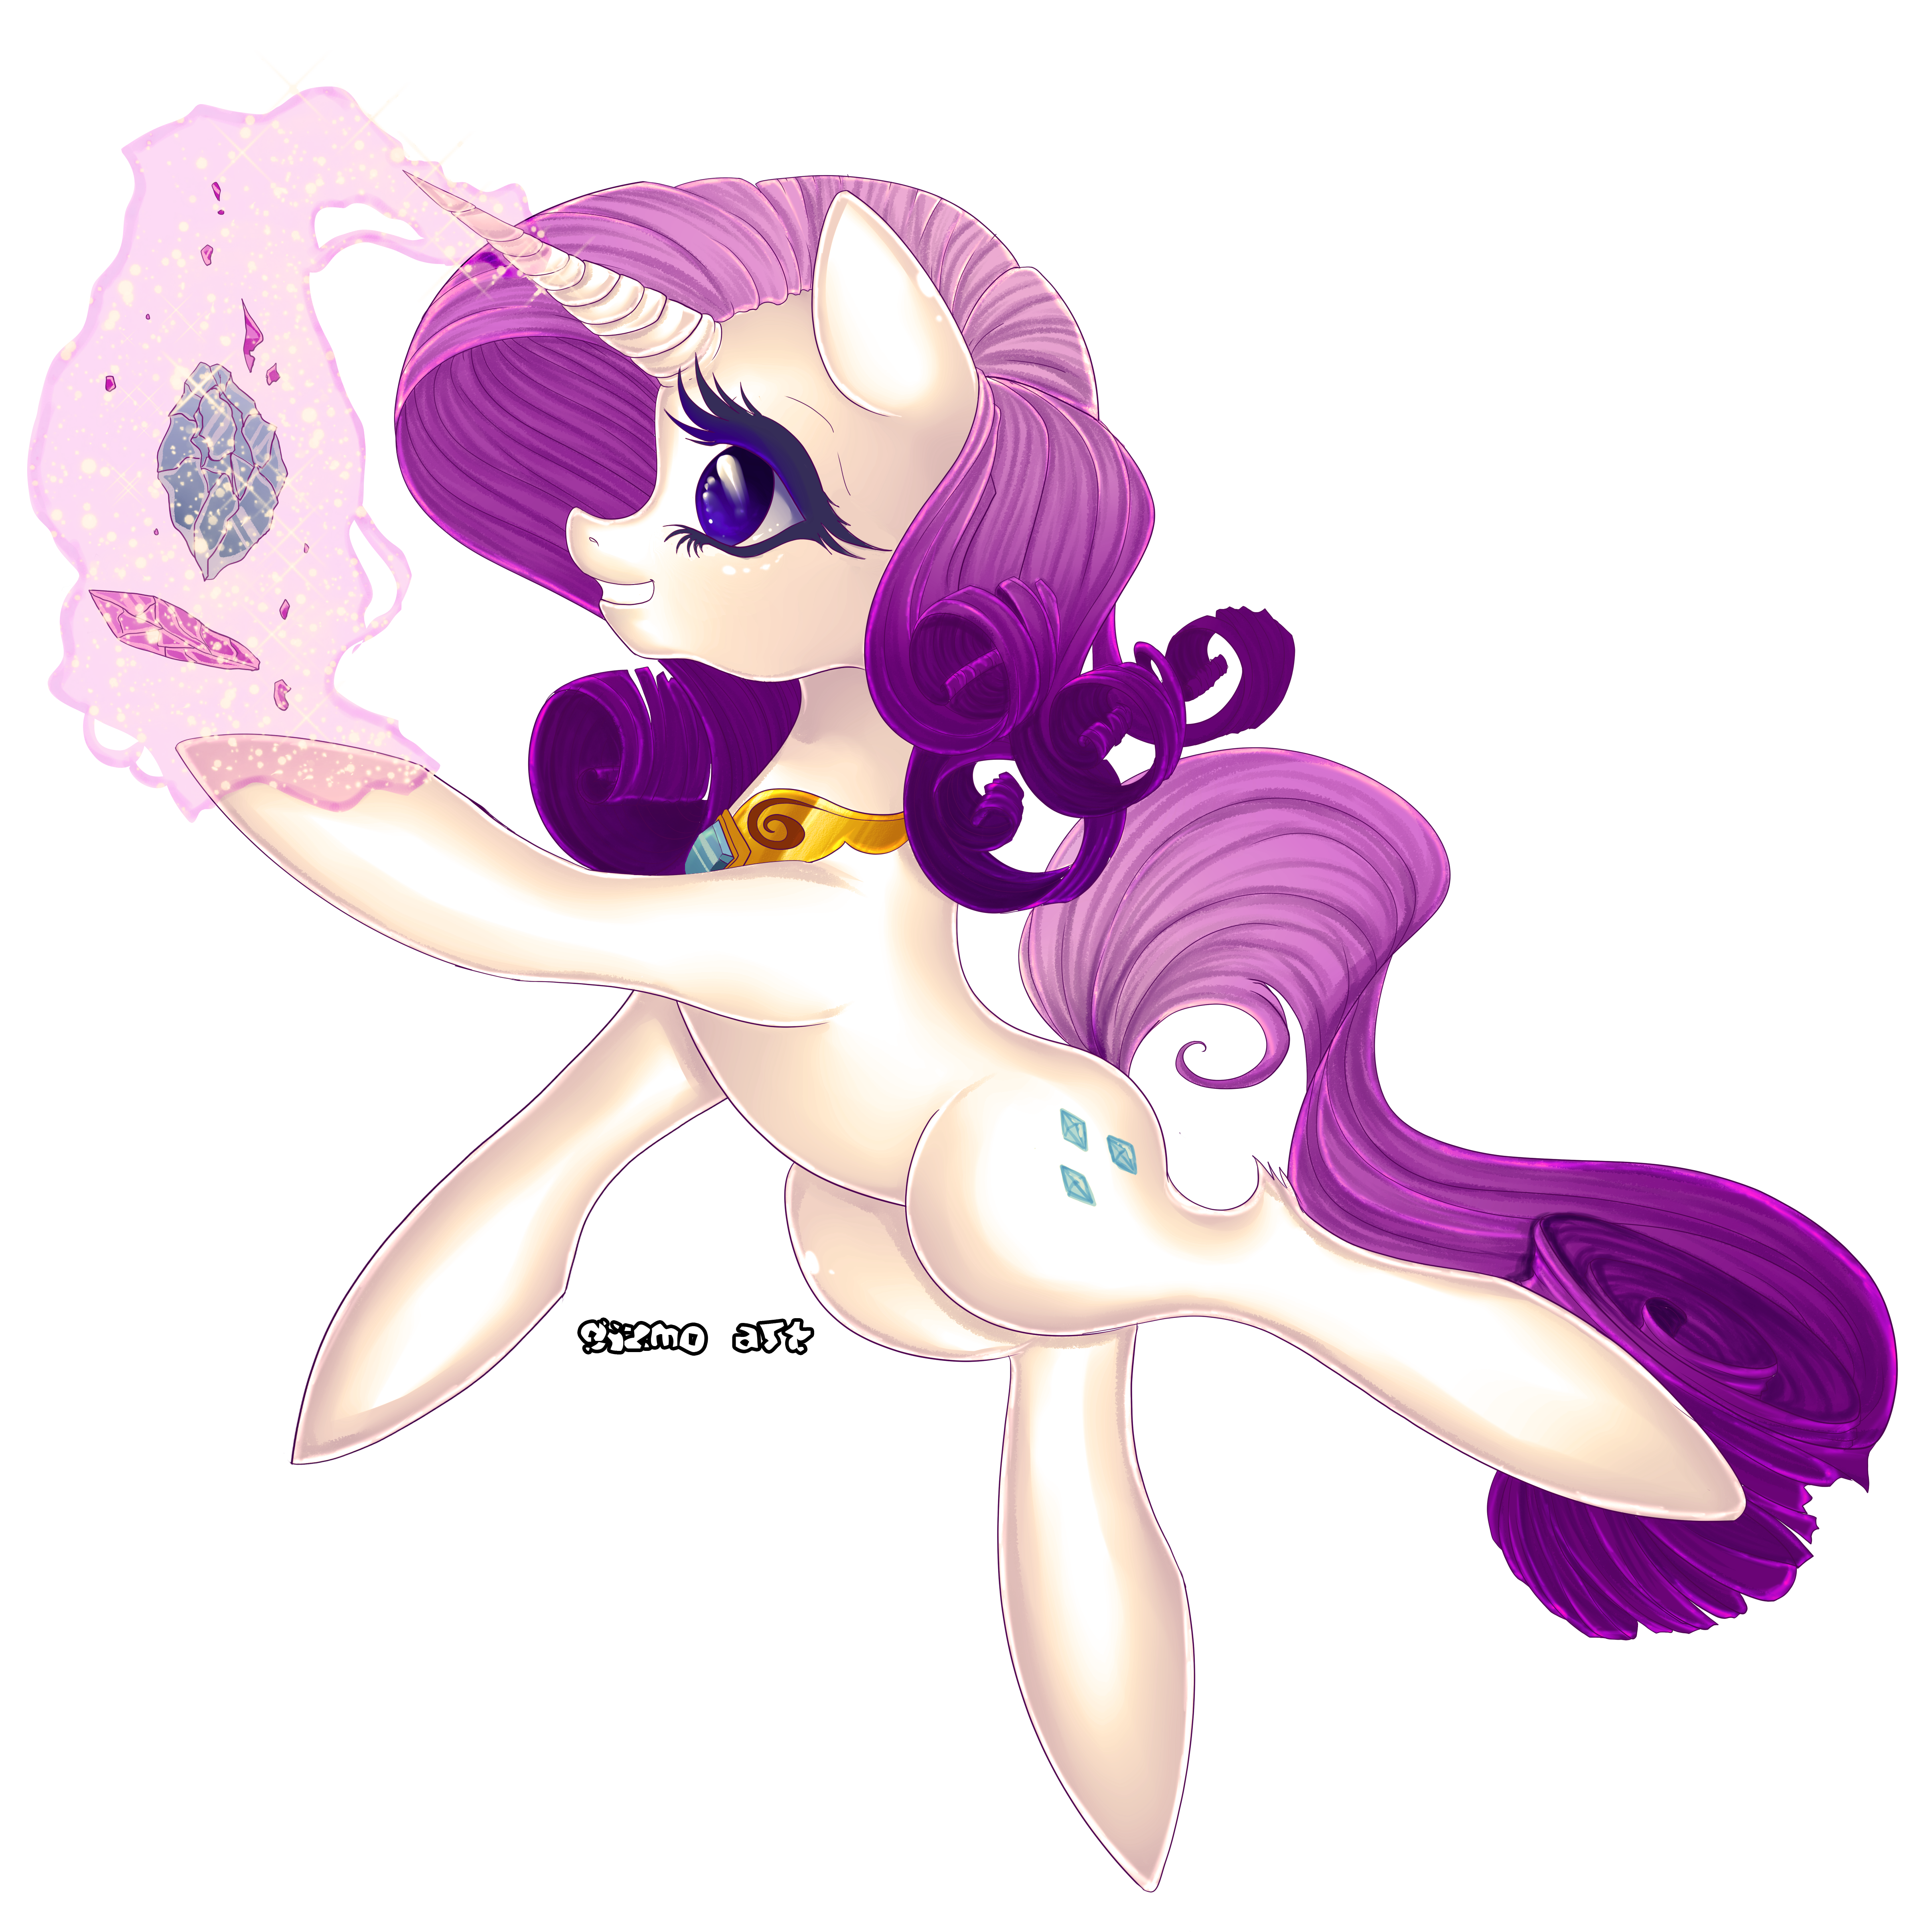 rarity_by_0_gizmosue_0-d5oouoc.png